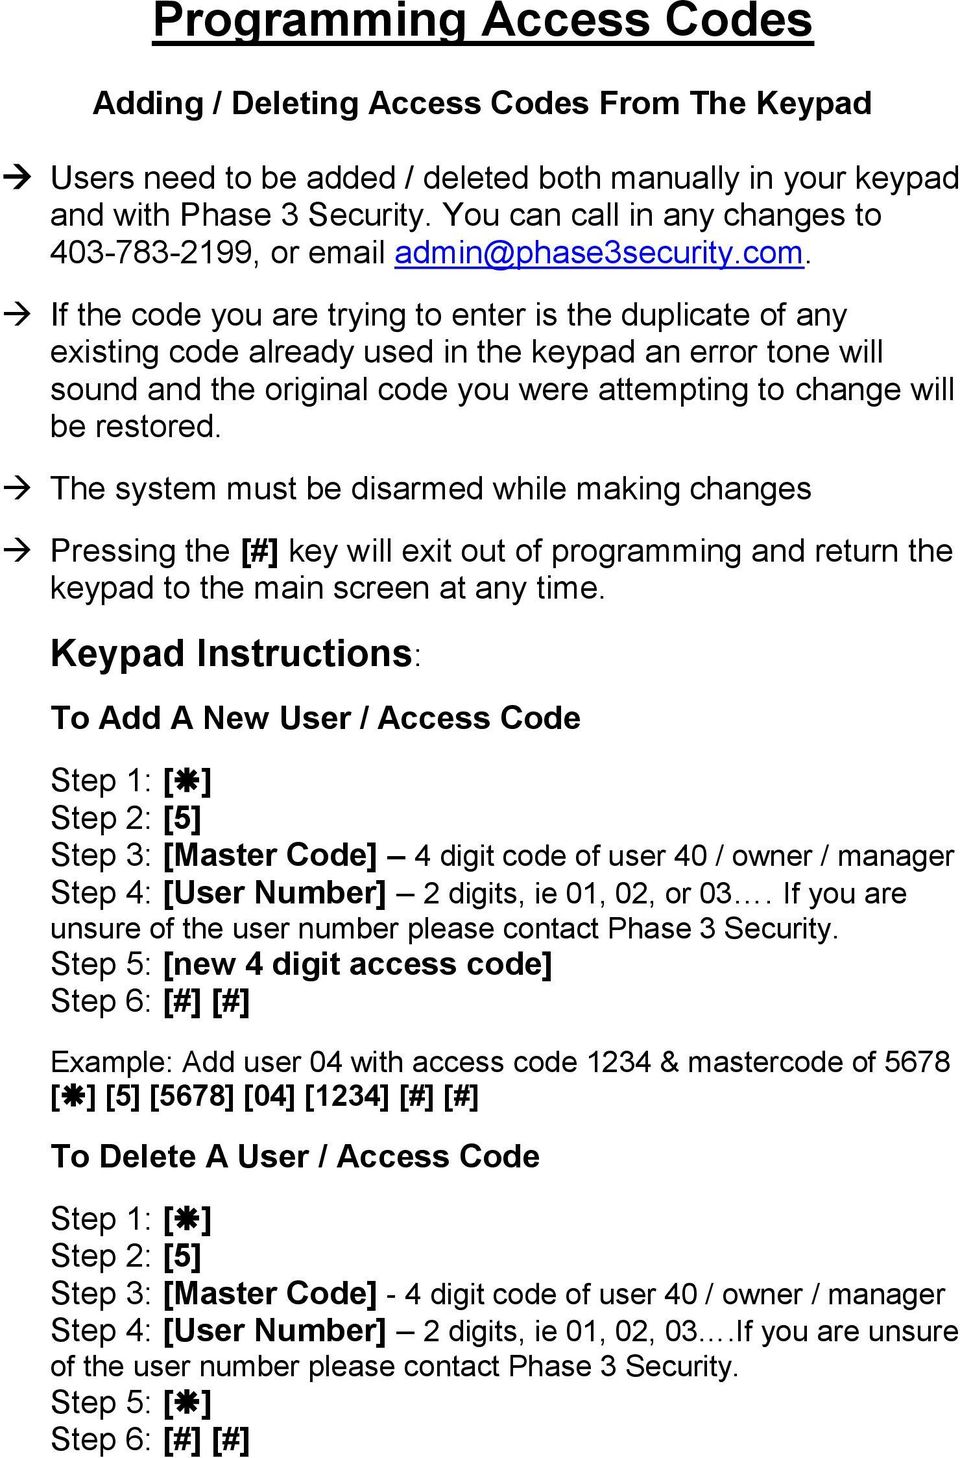 If the code you are trying to enter is the duplicate of any existing code already used in the keypad an error tone will sound and the original code you were attempting to change will be restored.